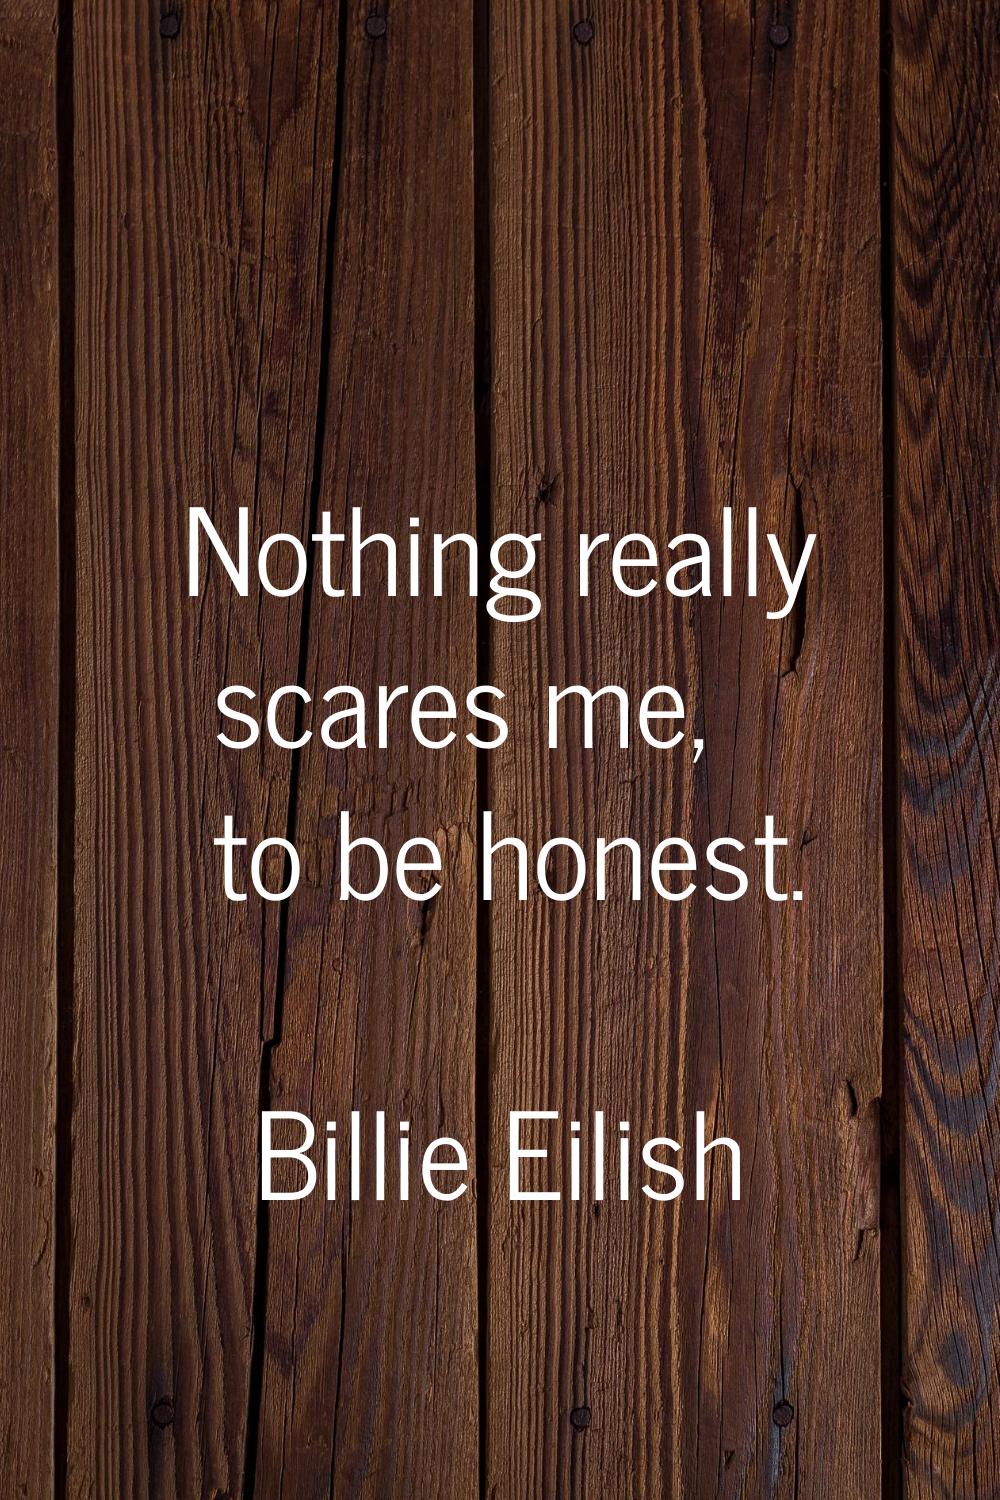 Nothing really scares me, to be honest.